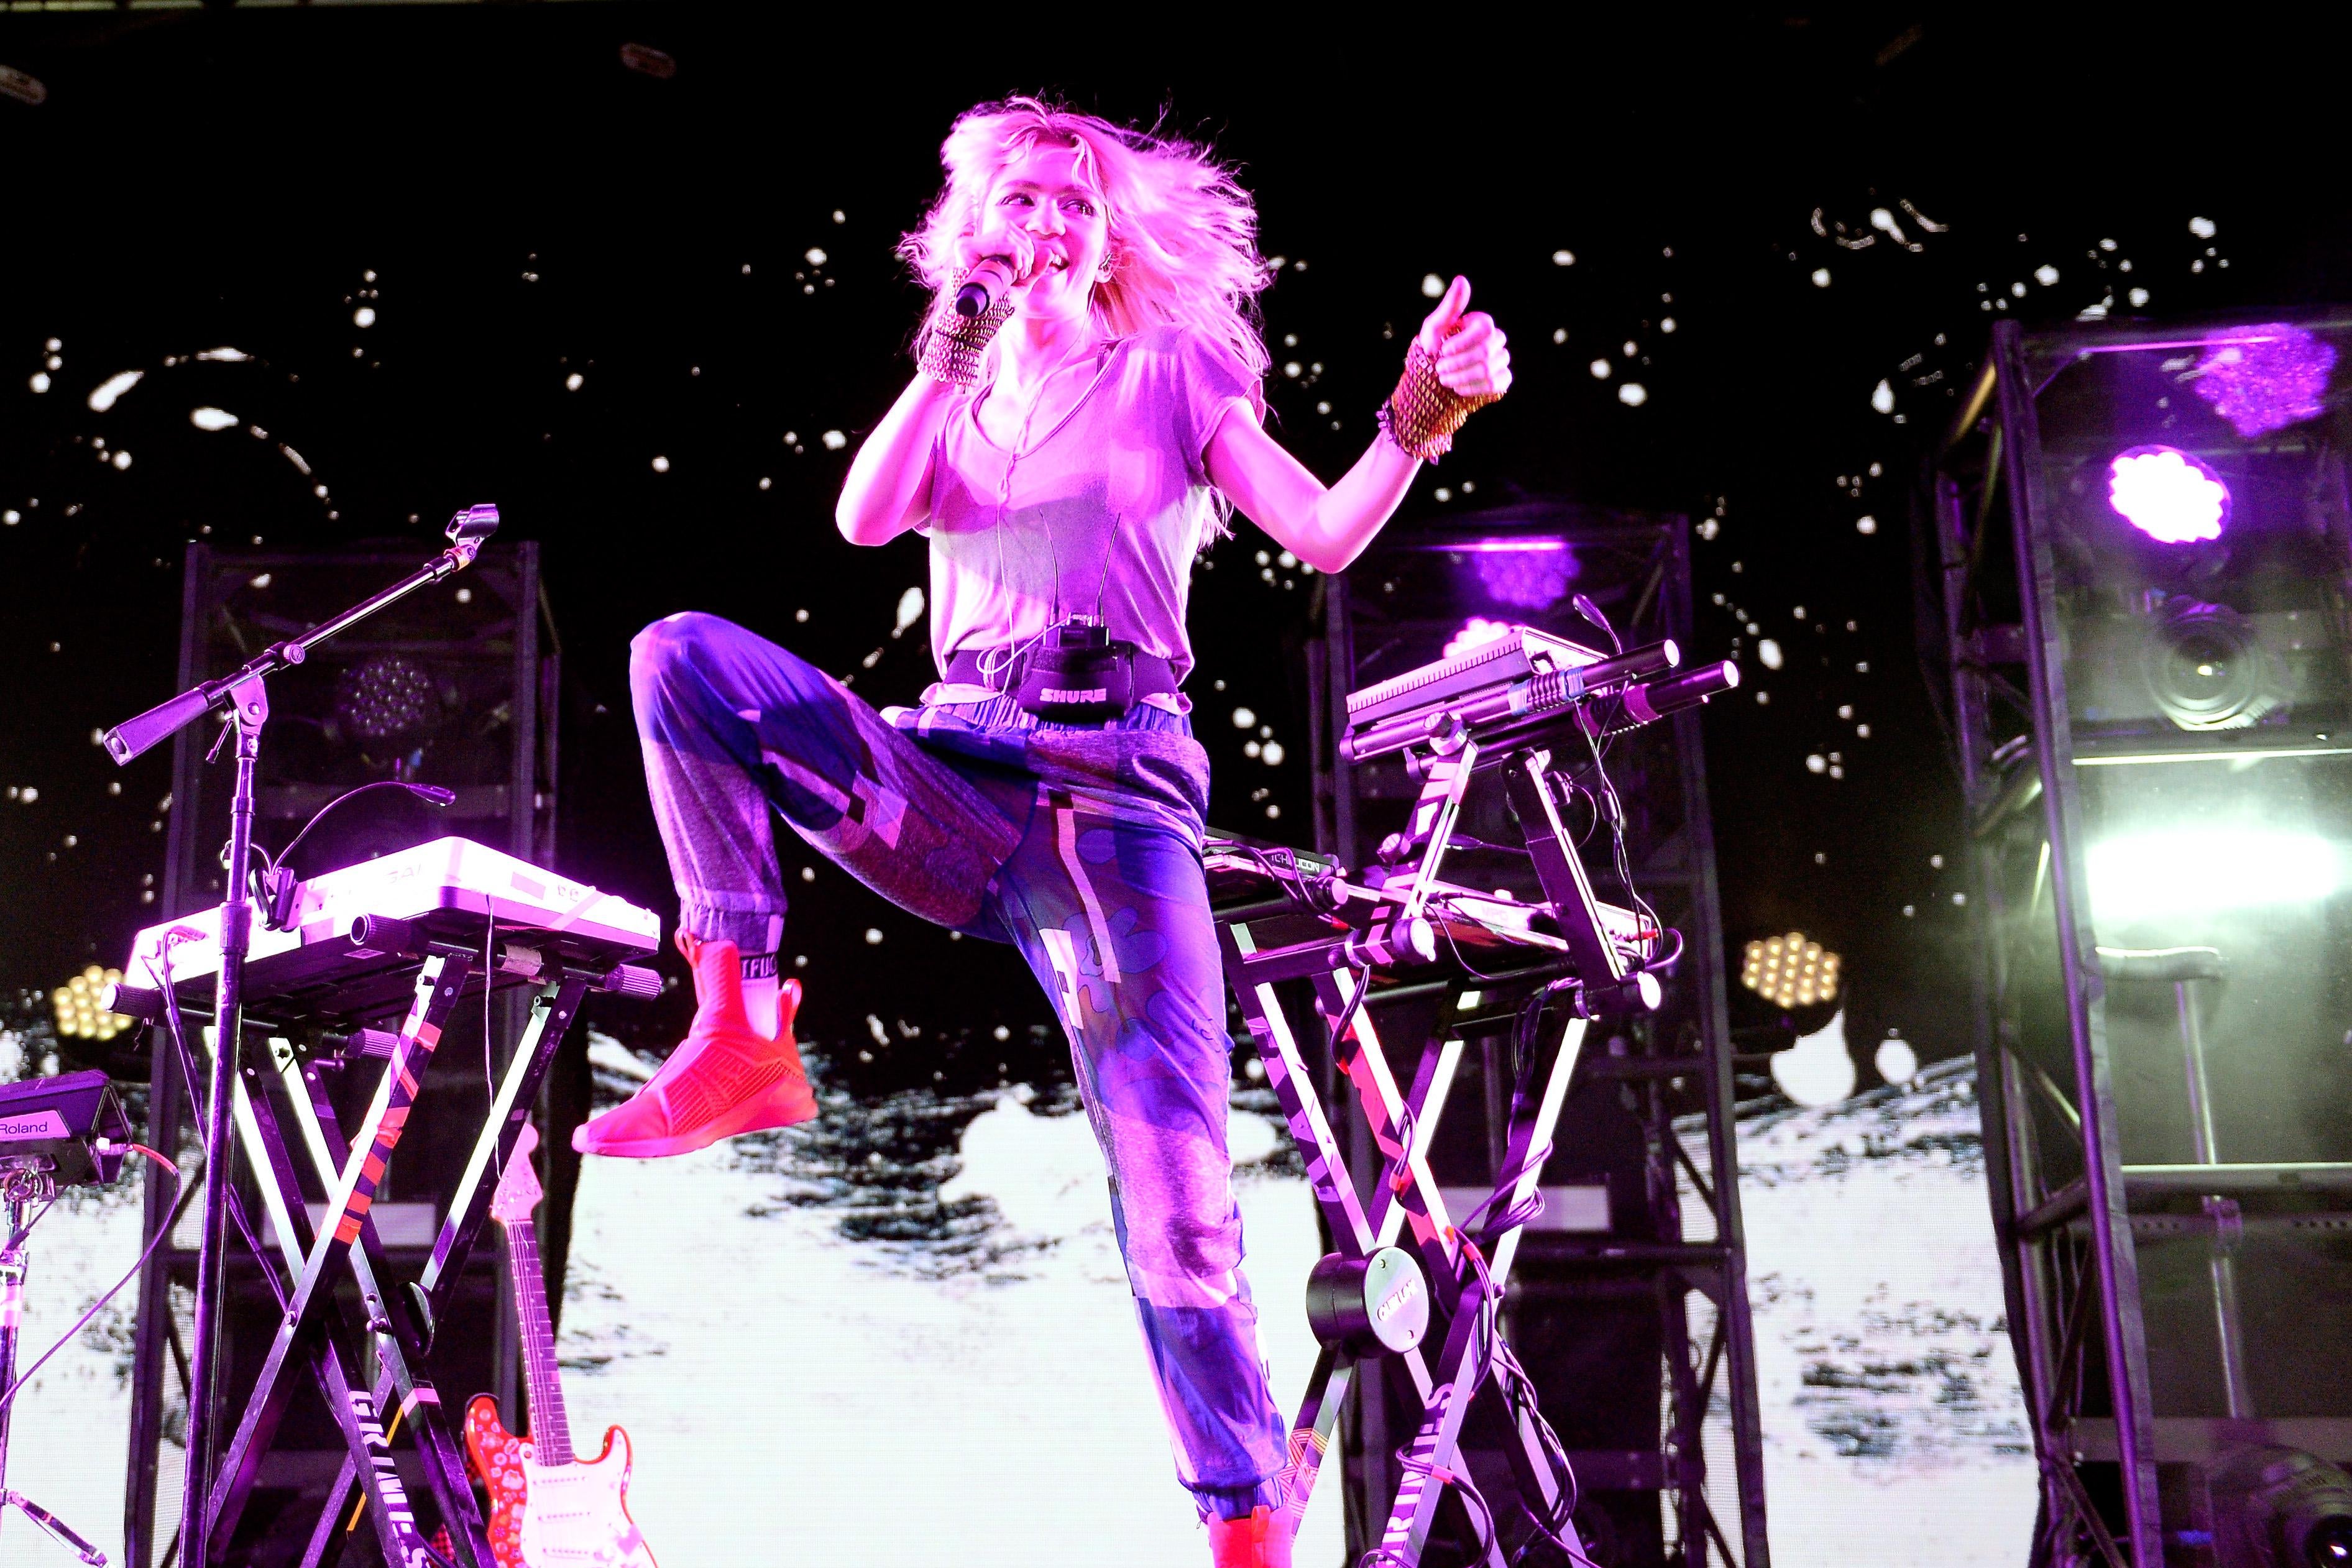 Grimes performs onstage at Coachella in 2016